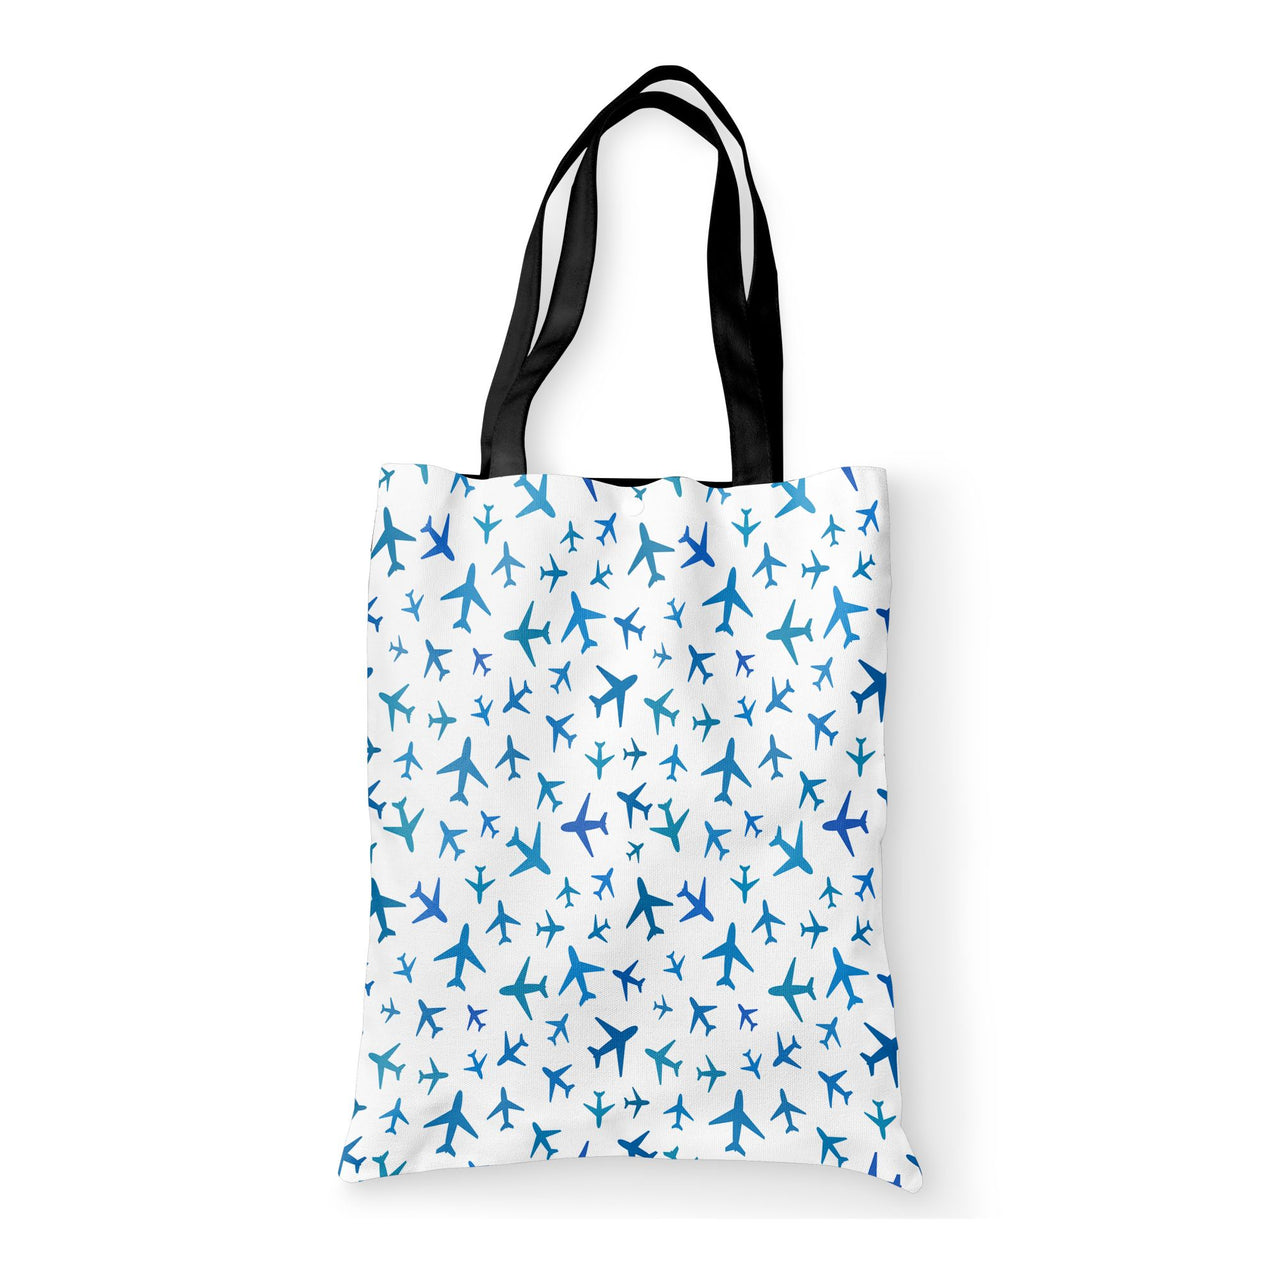 Many Airplanes White Designed Tote Bags